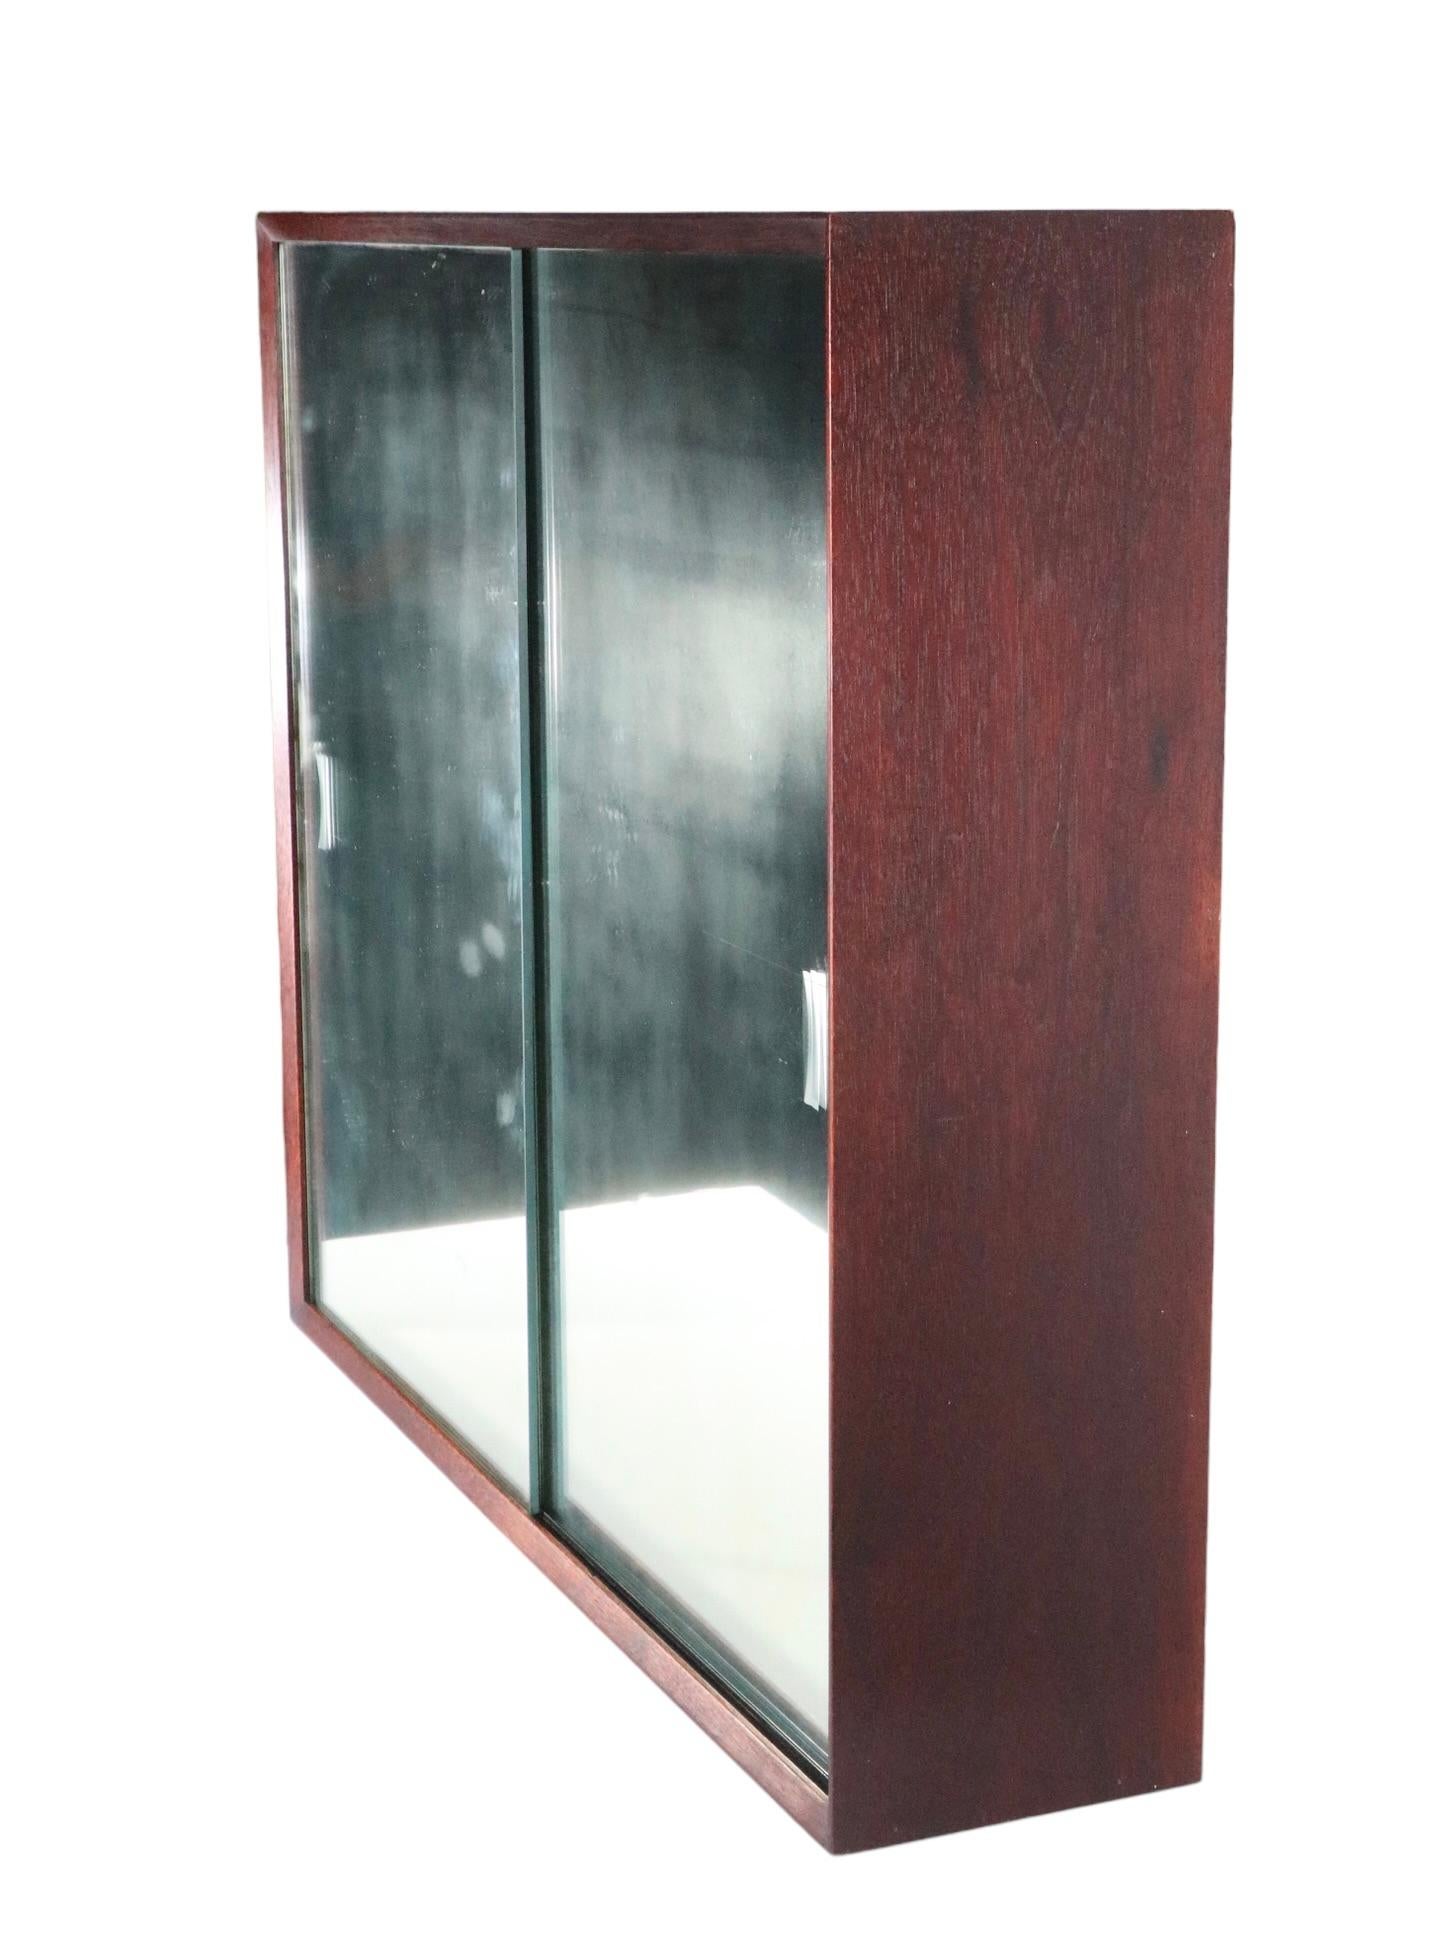 Danish Mid Century Wall Hanging Cabinet with Sliding Mirrored Doors, circa 1950s For Sale 9